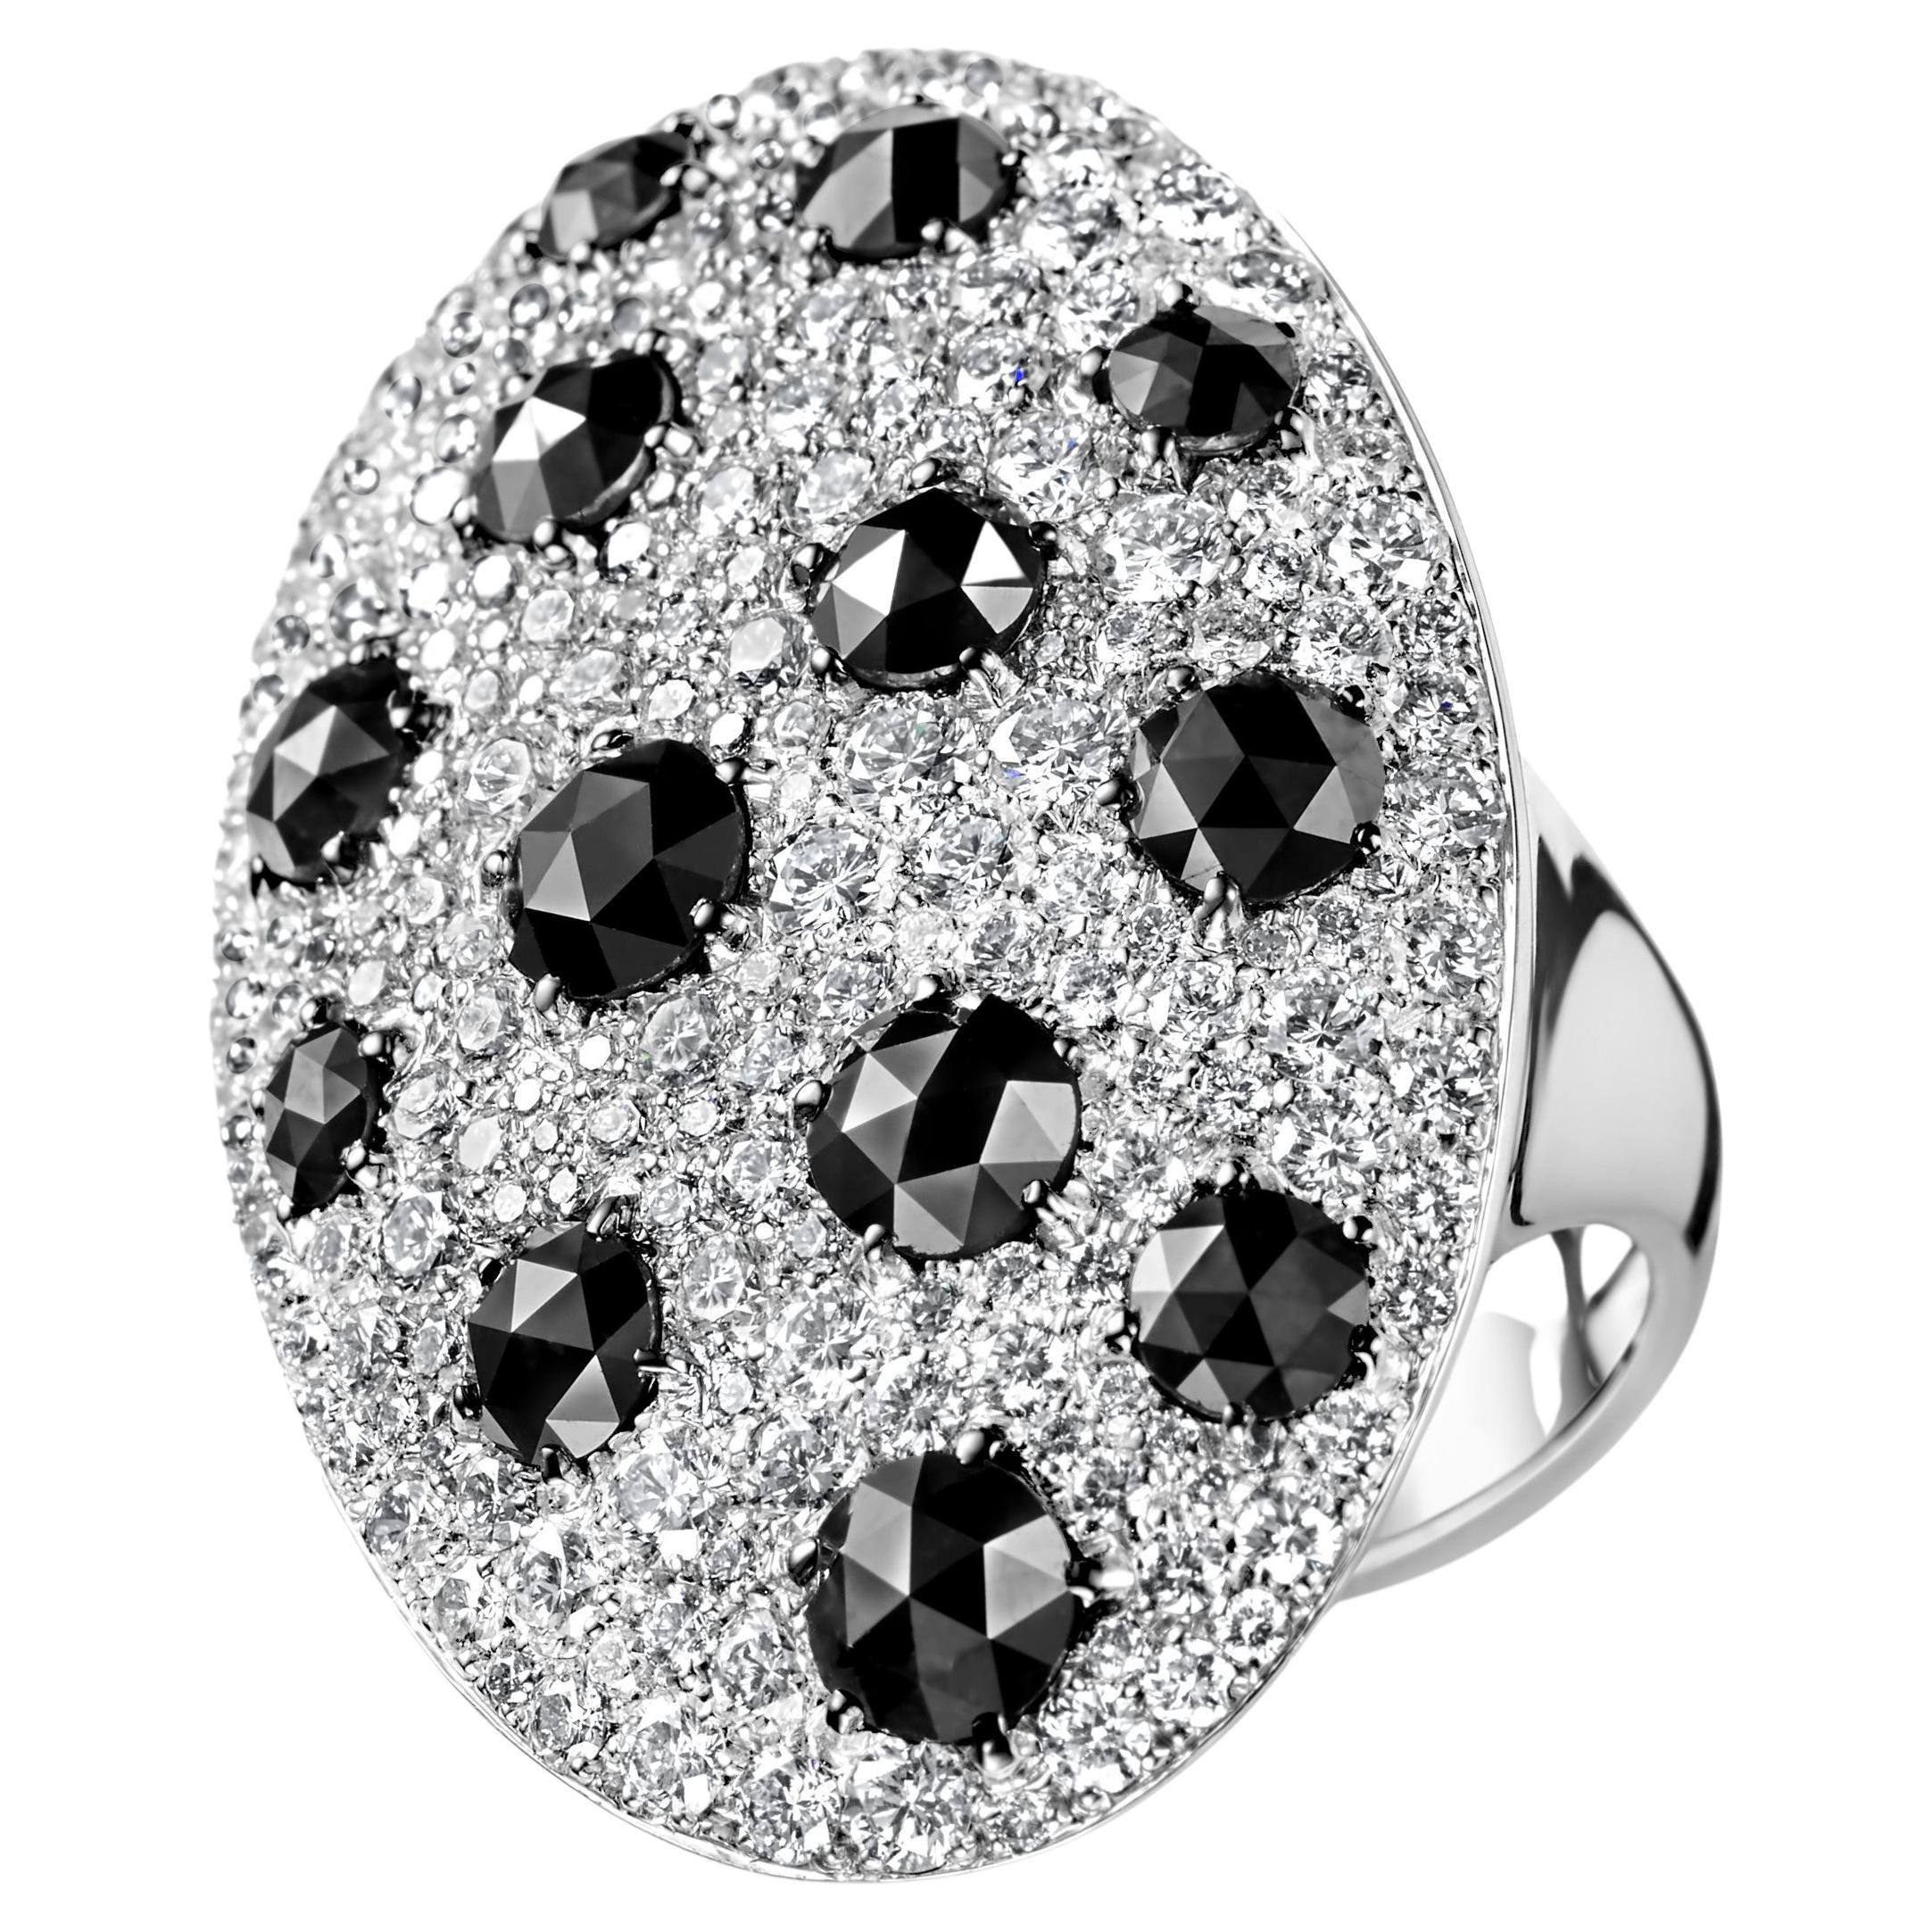 18kt White Gold Ring with 3.88 Ct Black & 3.87 Ct White Diamonds For Sale